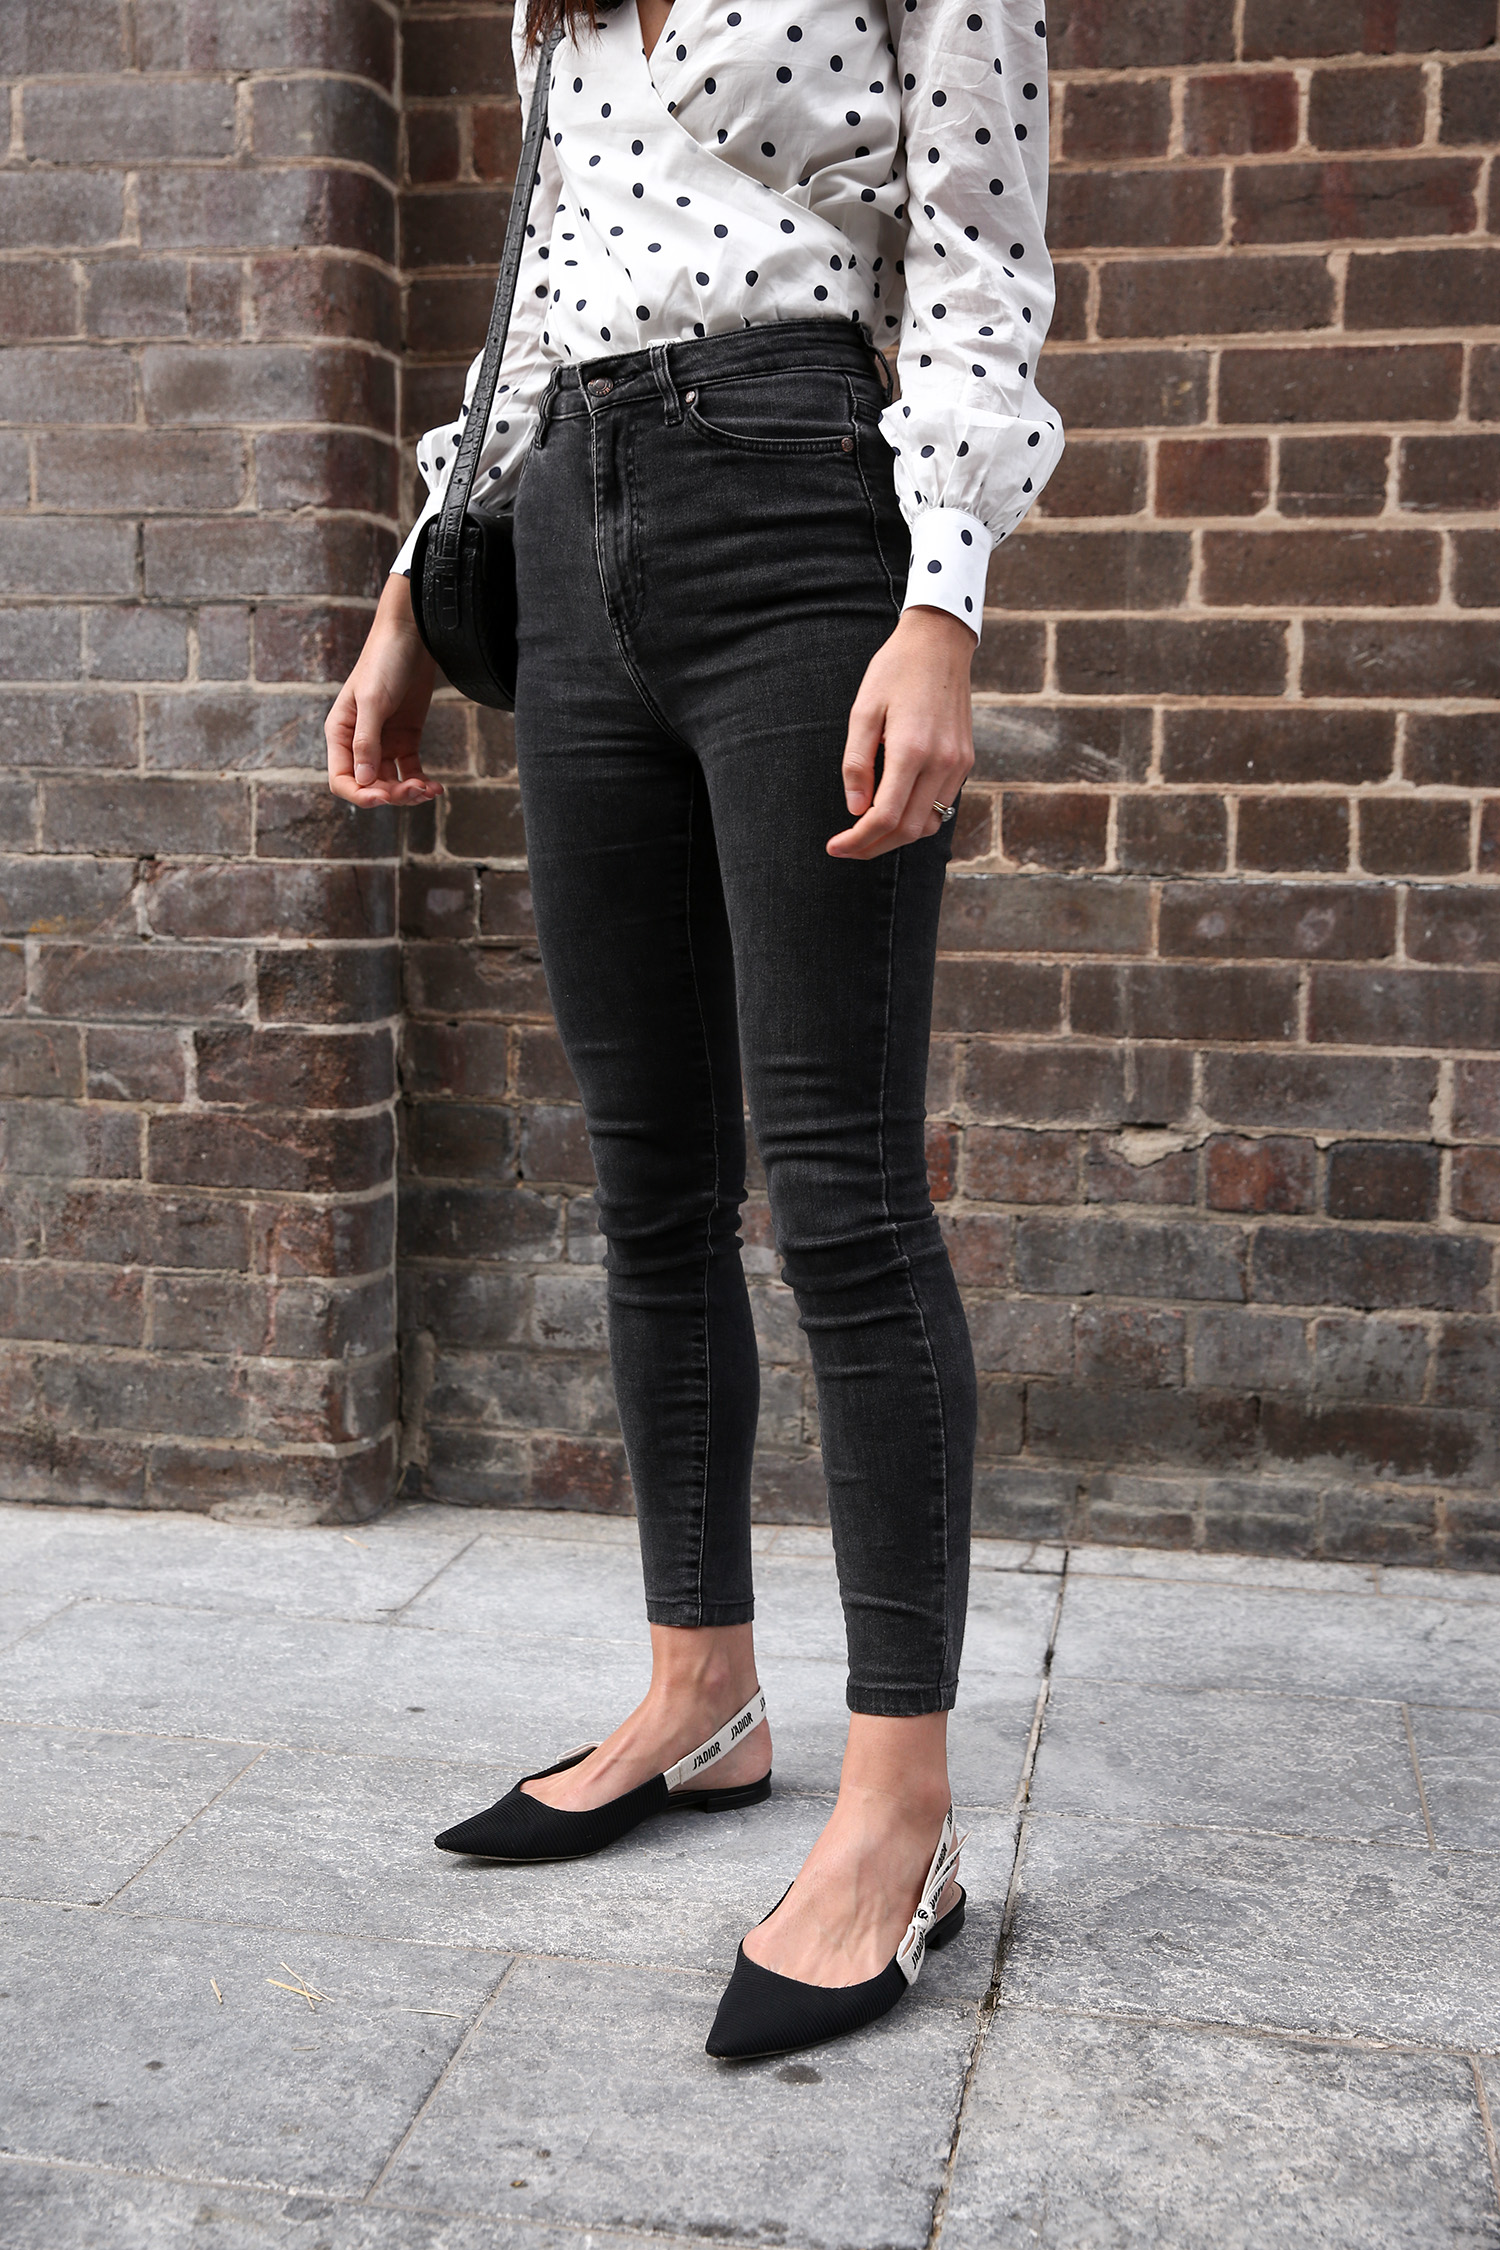 Minimal outfit wearing skinny jeans and structured blazer